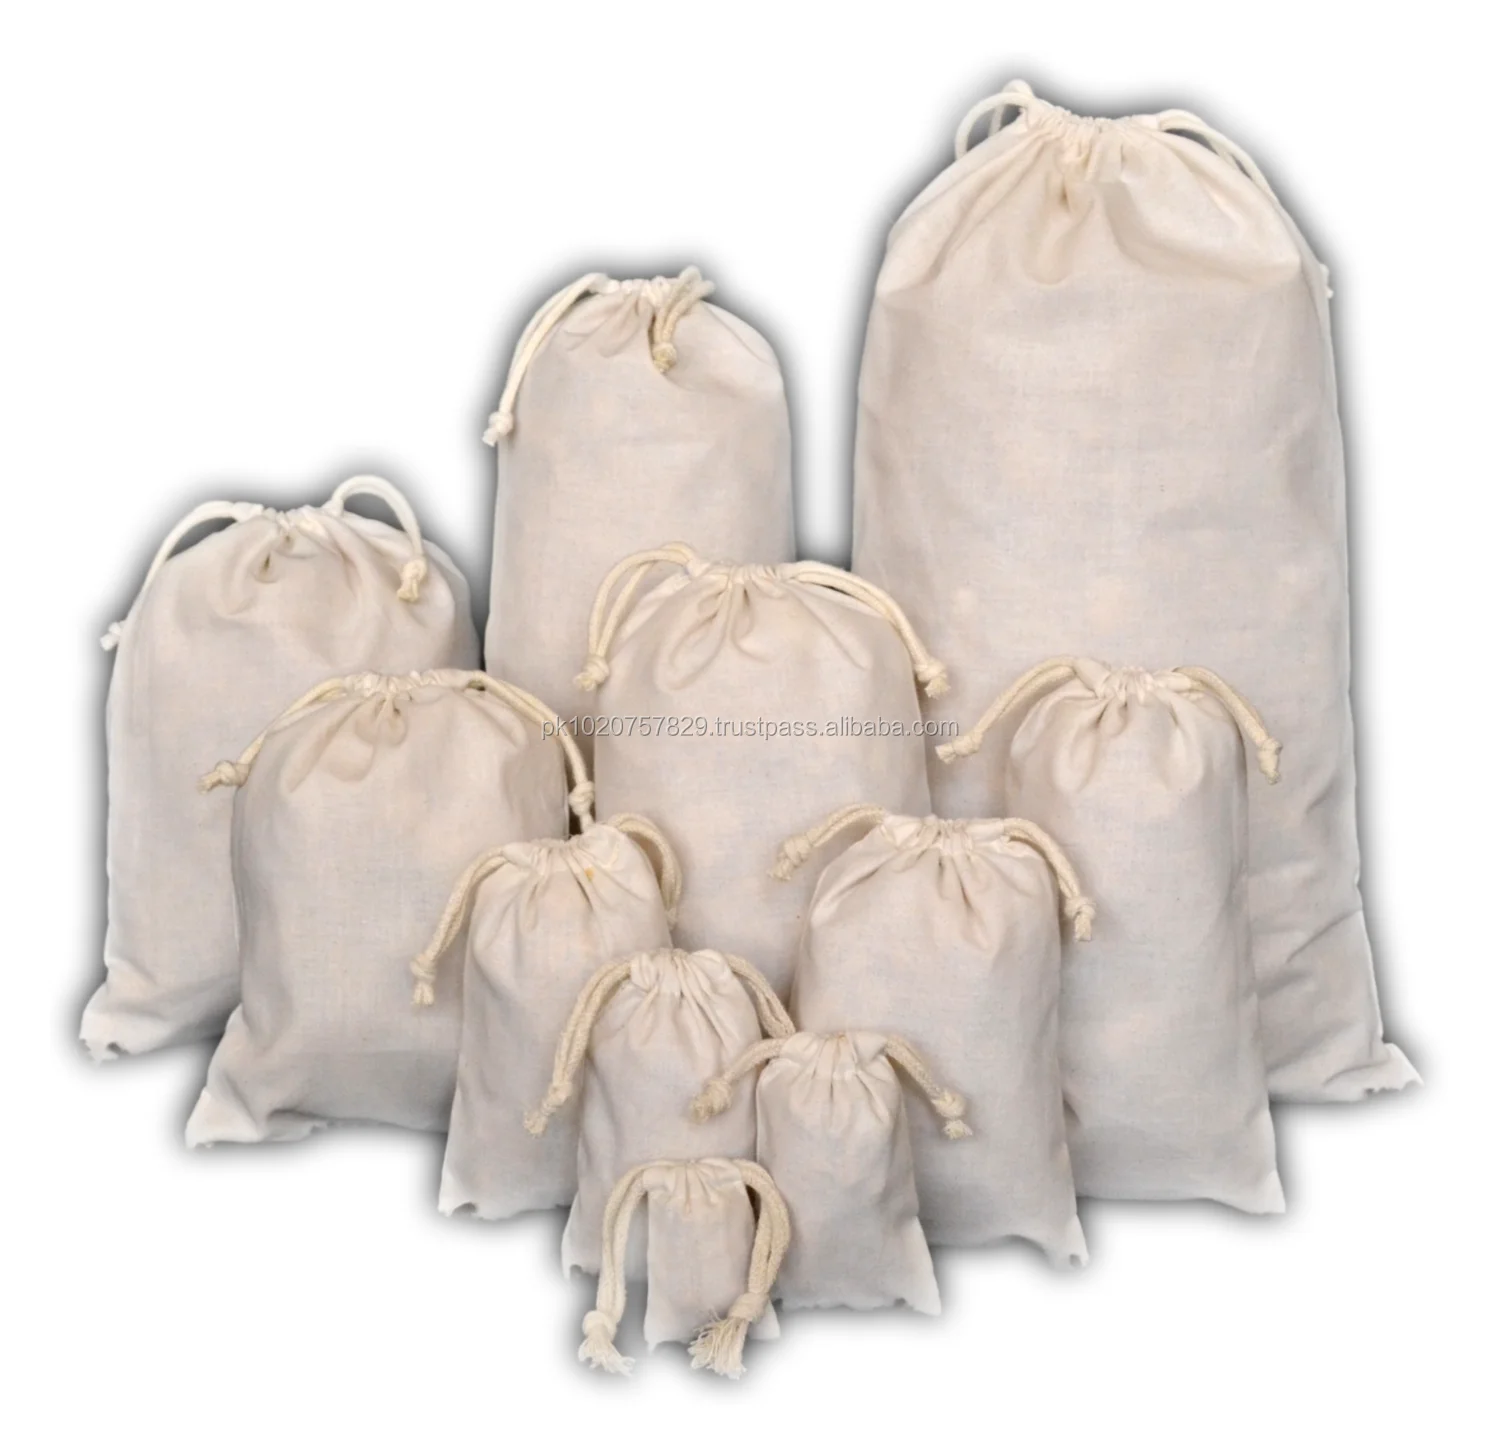 5 x 7 Inches Cotton Muslin Bags 100/% Organic Cotton Double Drawstring Eco-friendly Reusable Premium Quality Muslin Bags